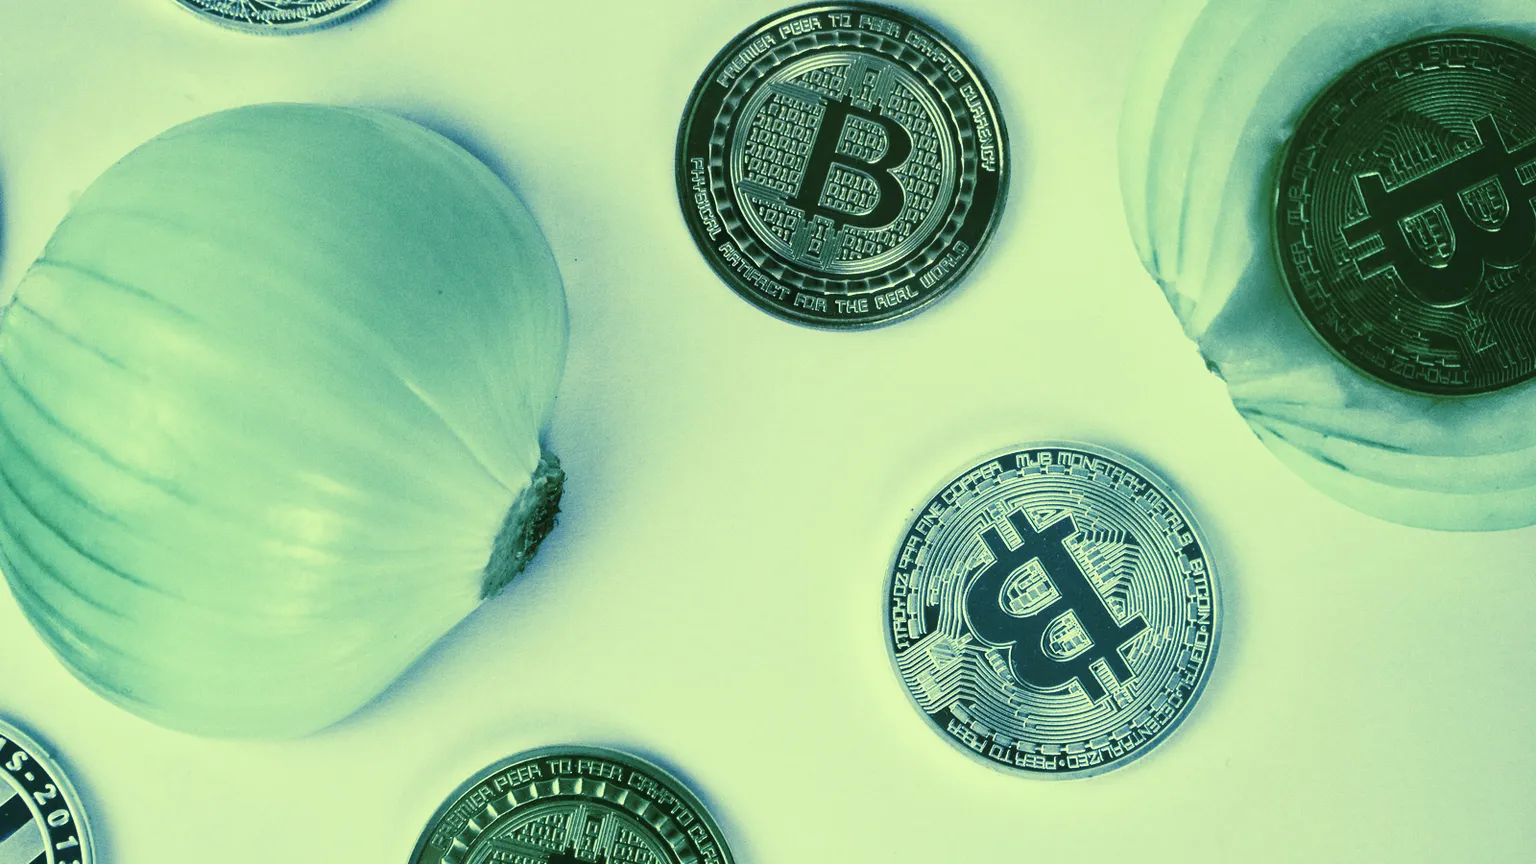 Tor receives crypto donations. Image: Shutterstock